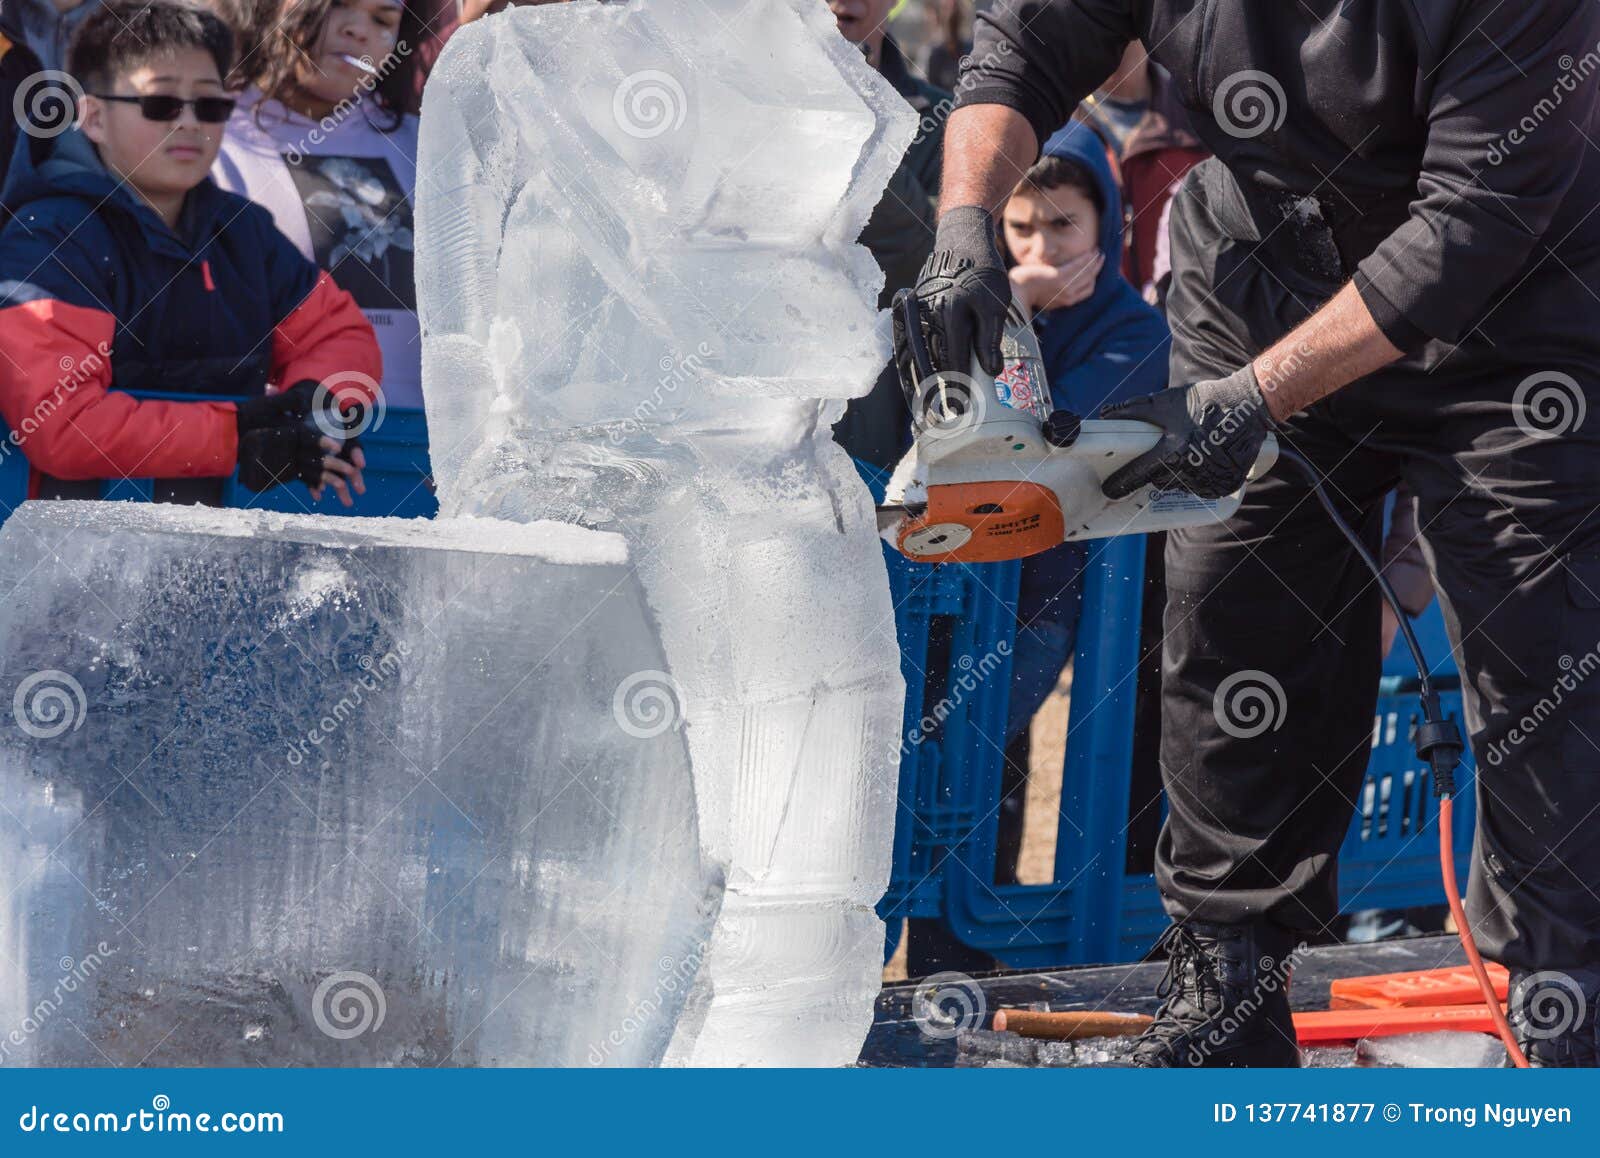 Sculpture Demos at Annual Frost in Irving, Texas Editorial Photography - of children, holiday: 137741877